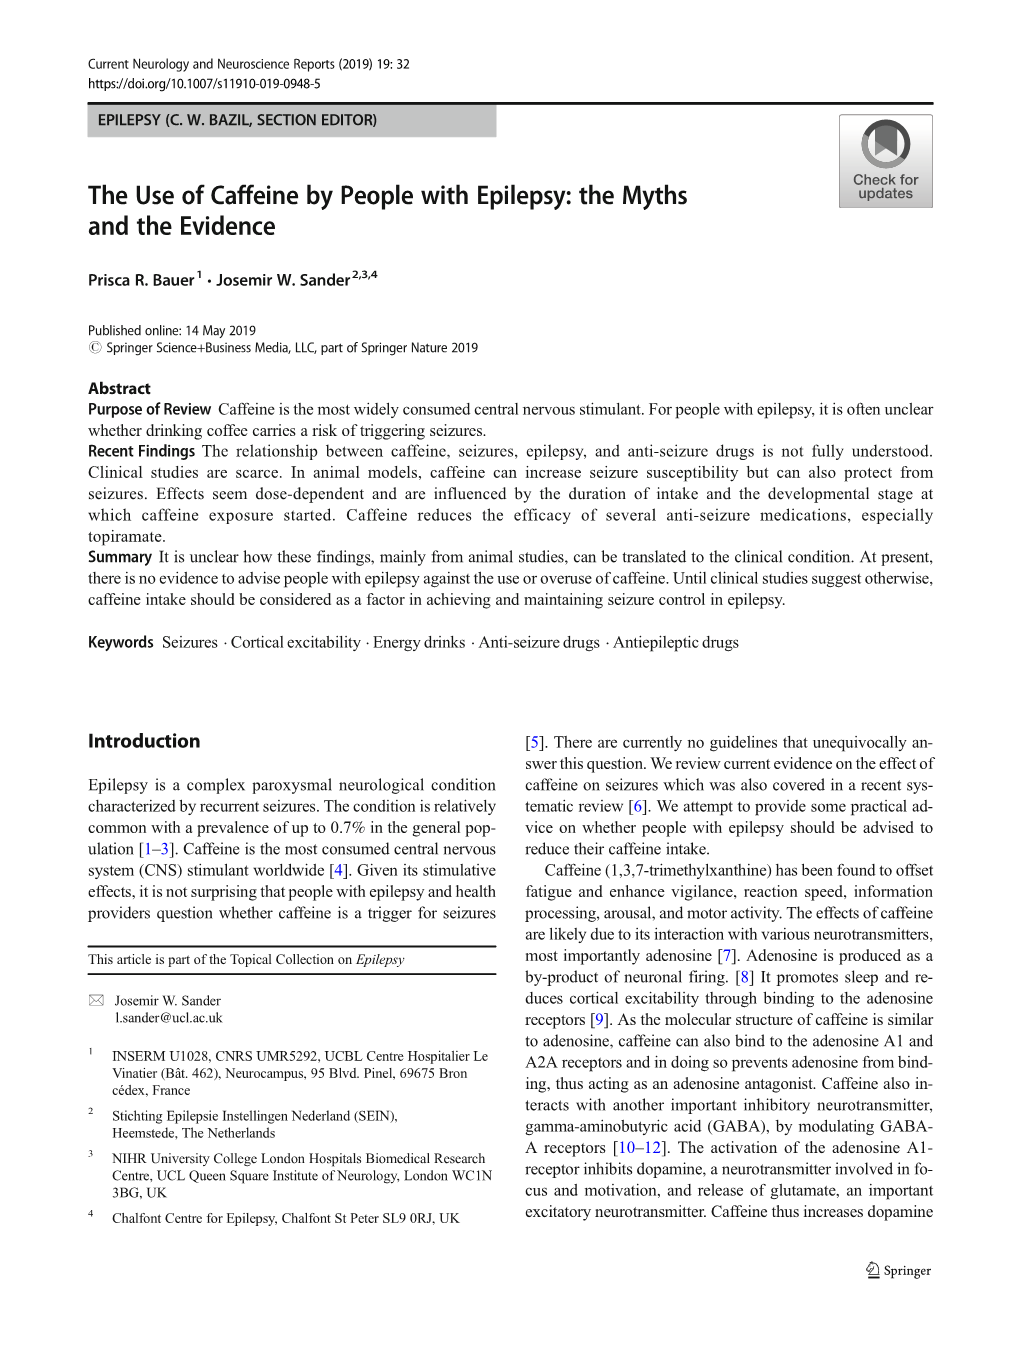 The Use of Caffeine by People with Epilepsy: the Myths and the Evidence